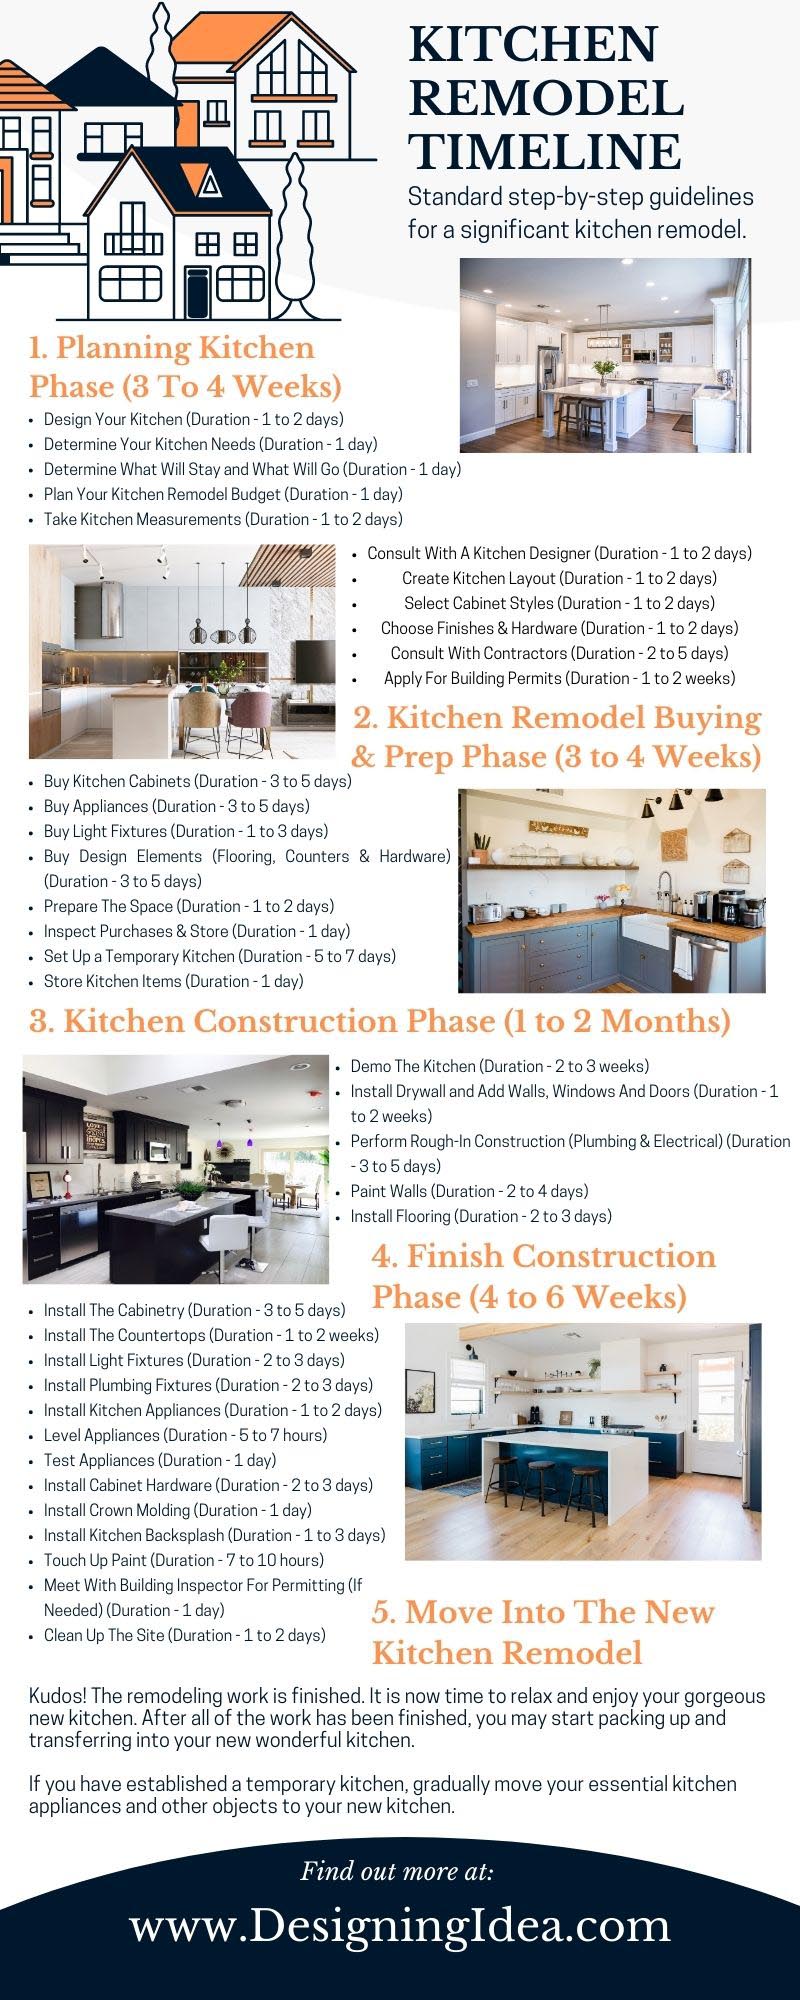 Kitchen remodel timelime infographic